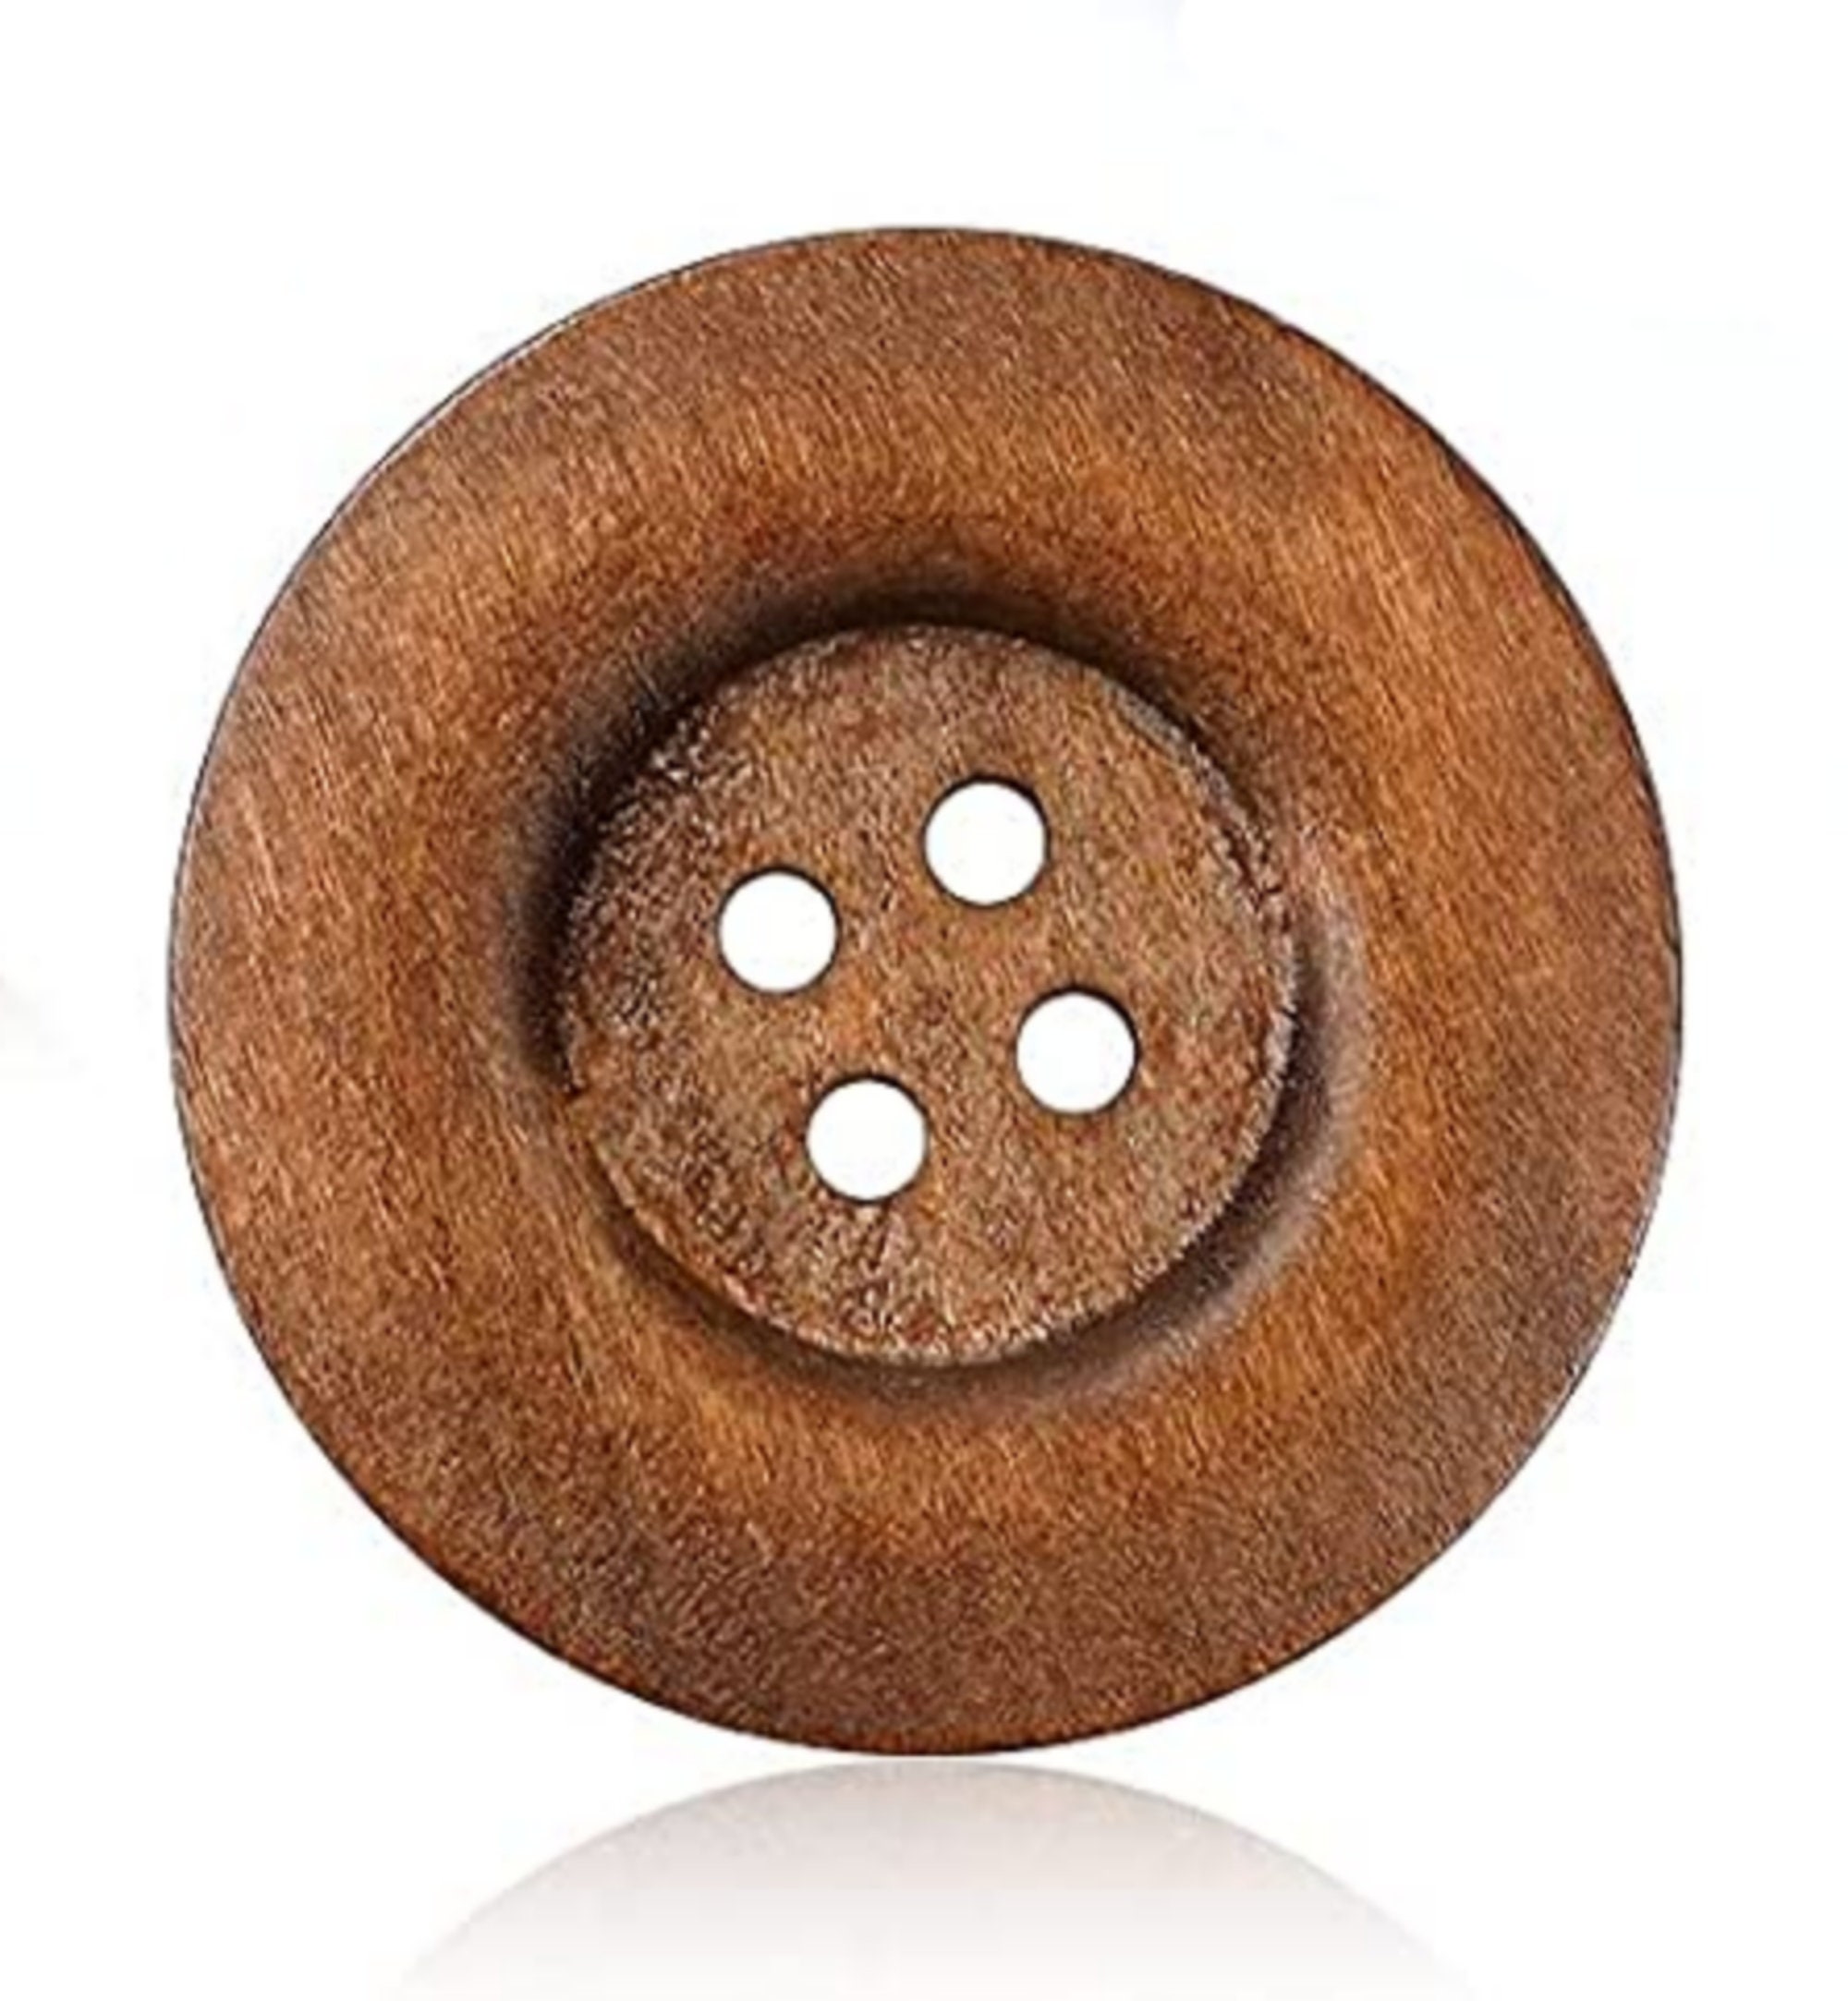 40 Pack Large Big Black Wooden Buttons 30mm 4 Hole Wood Button